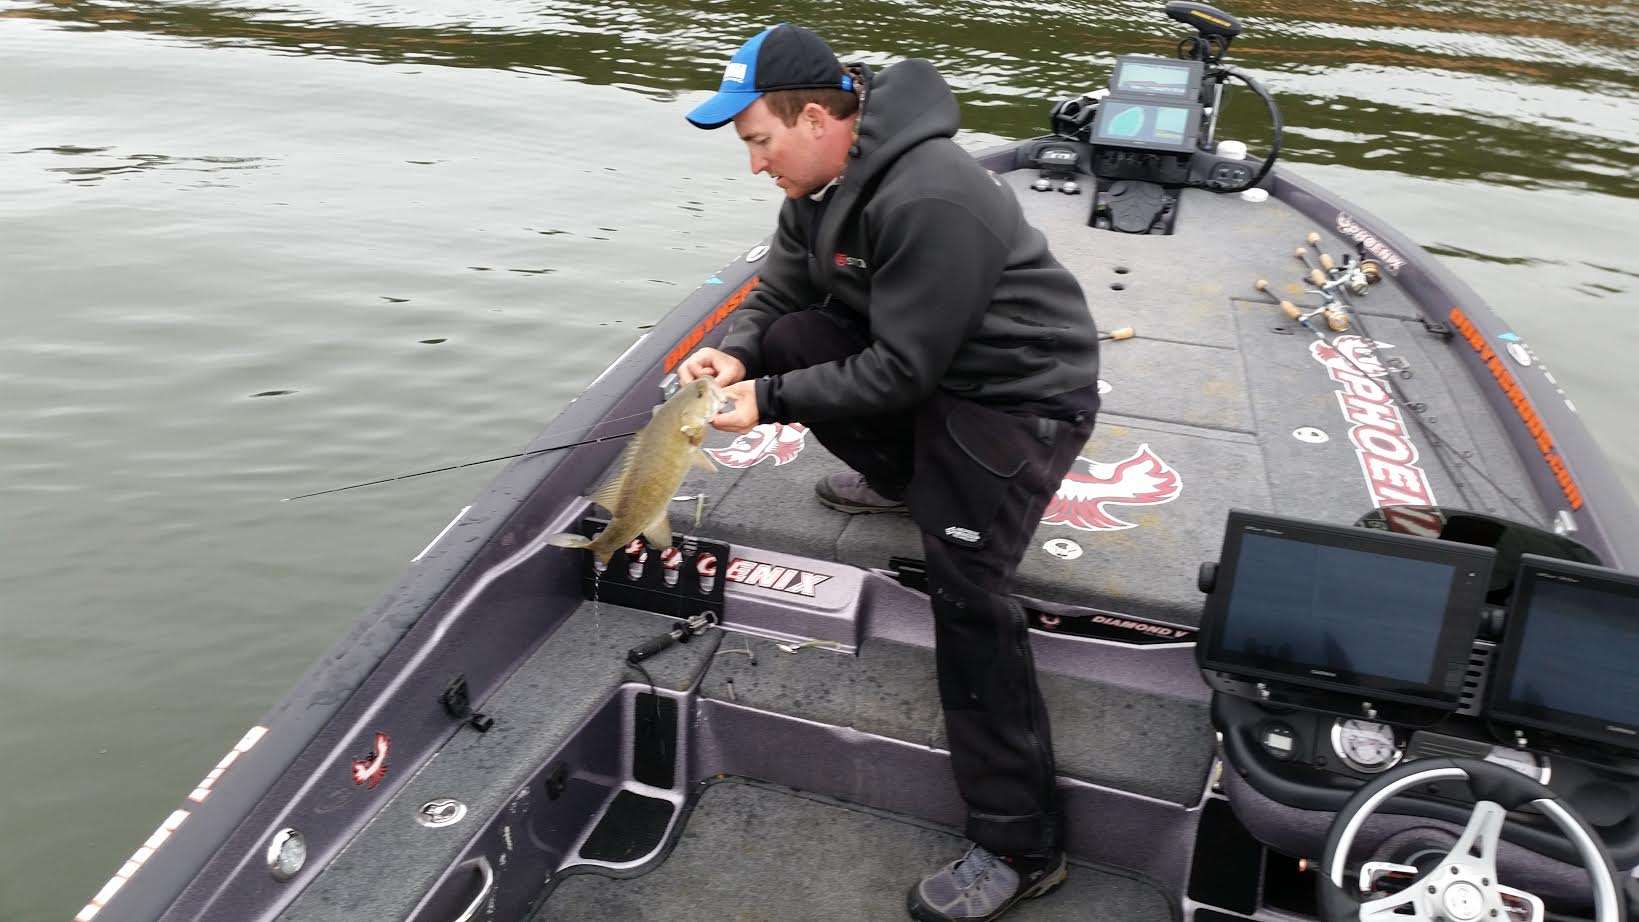 After four fish that didn't help the cause, Paul Mueller culls up another quarter pound.  Trying to make the Top 12 cut.